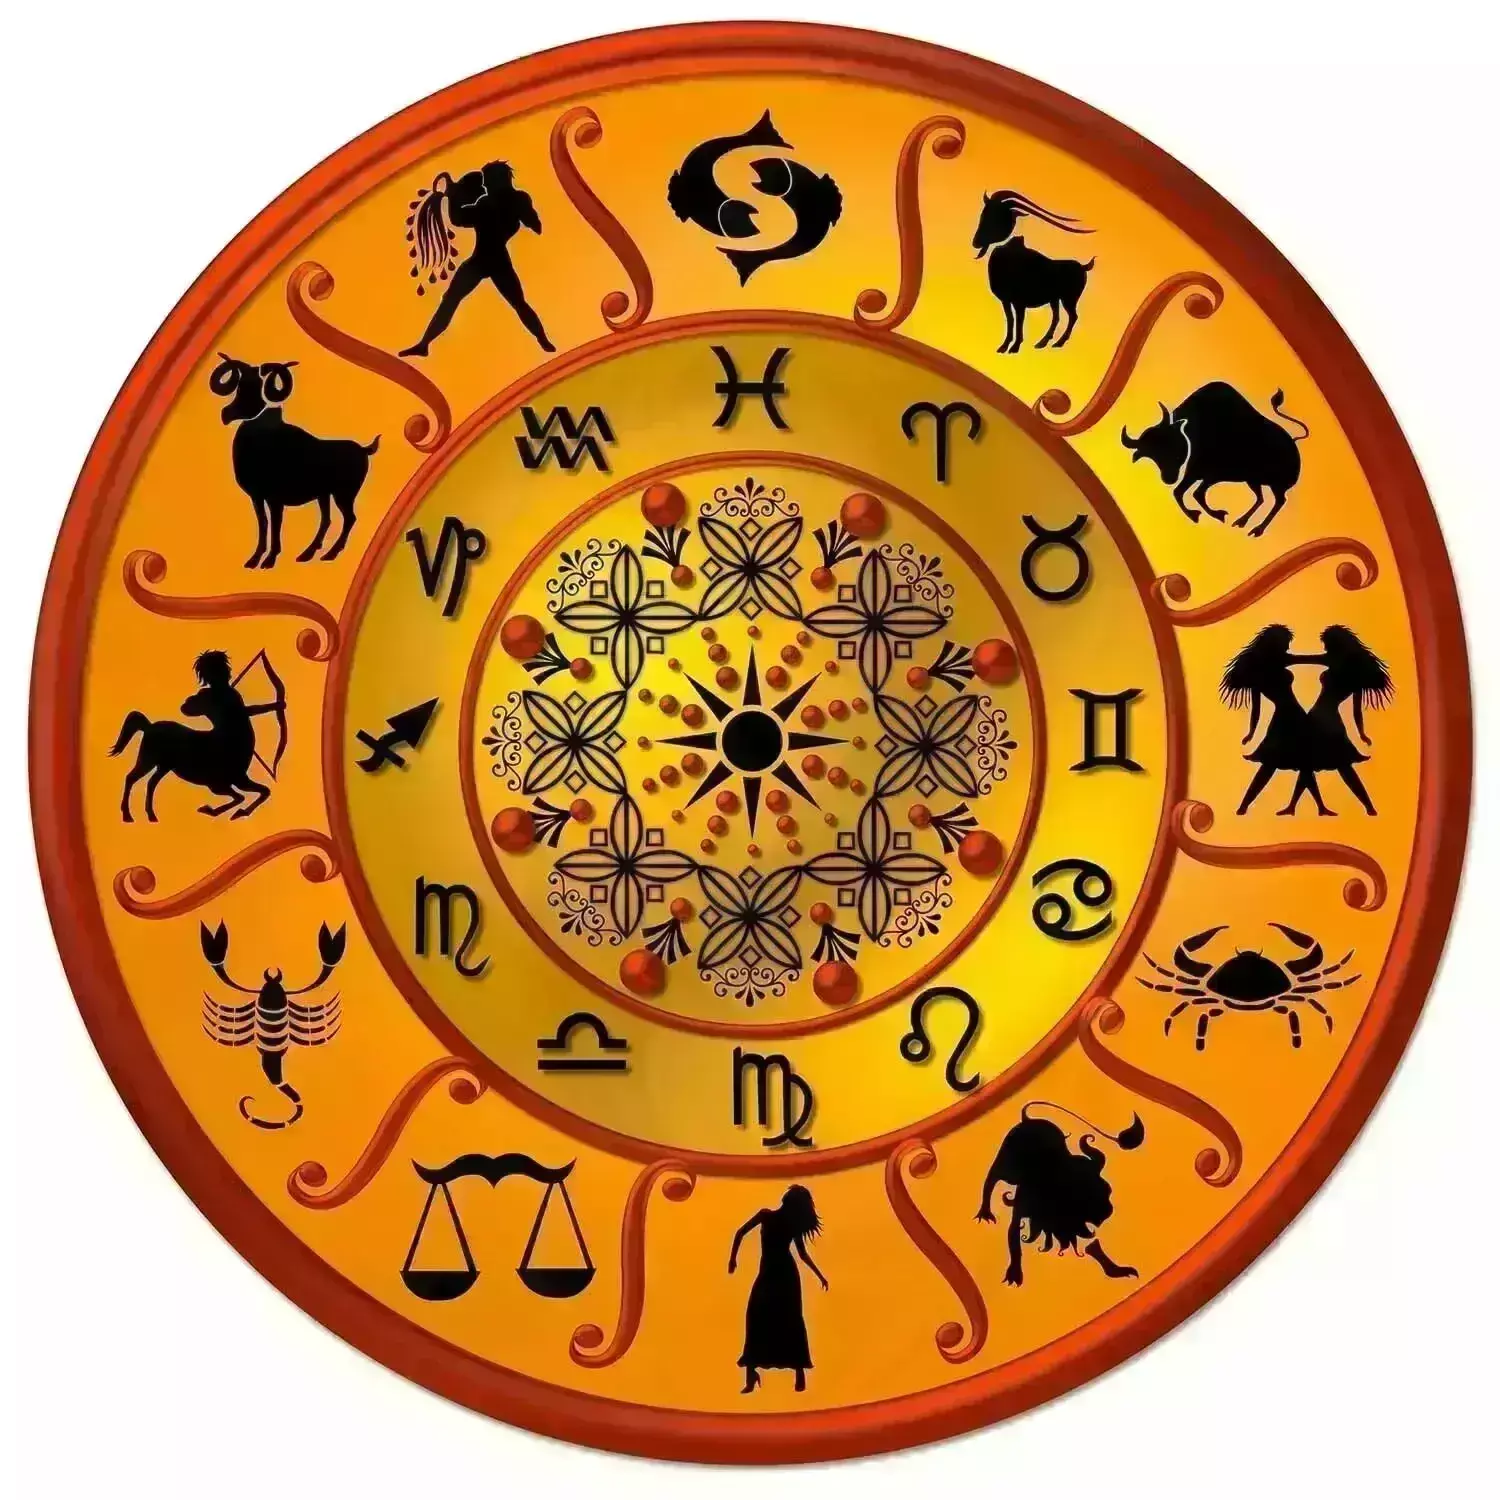 23 January – Know your todays horoscope